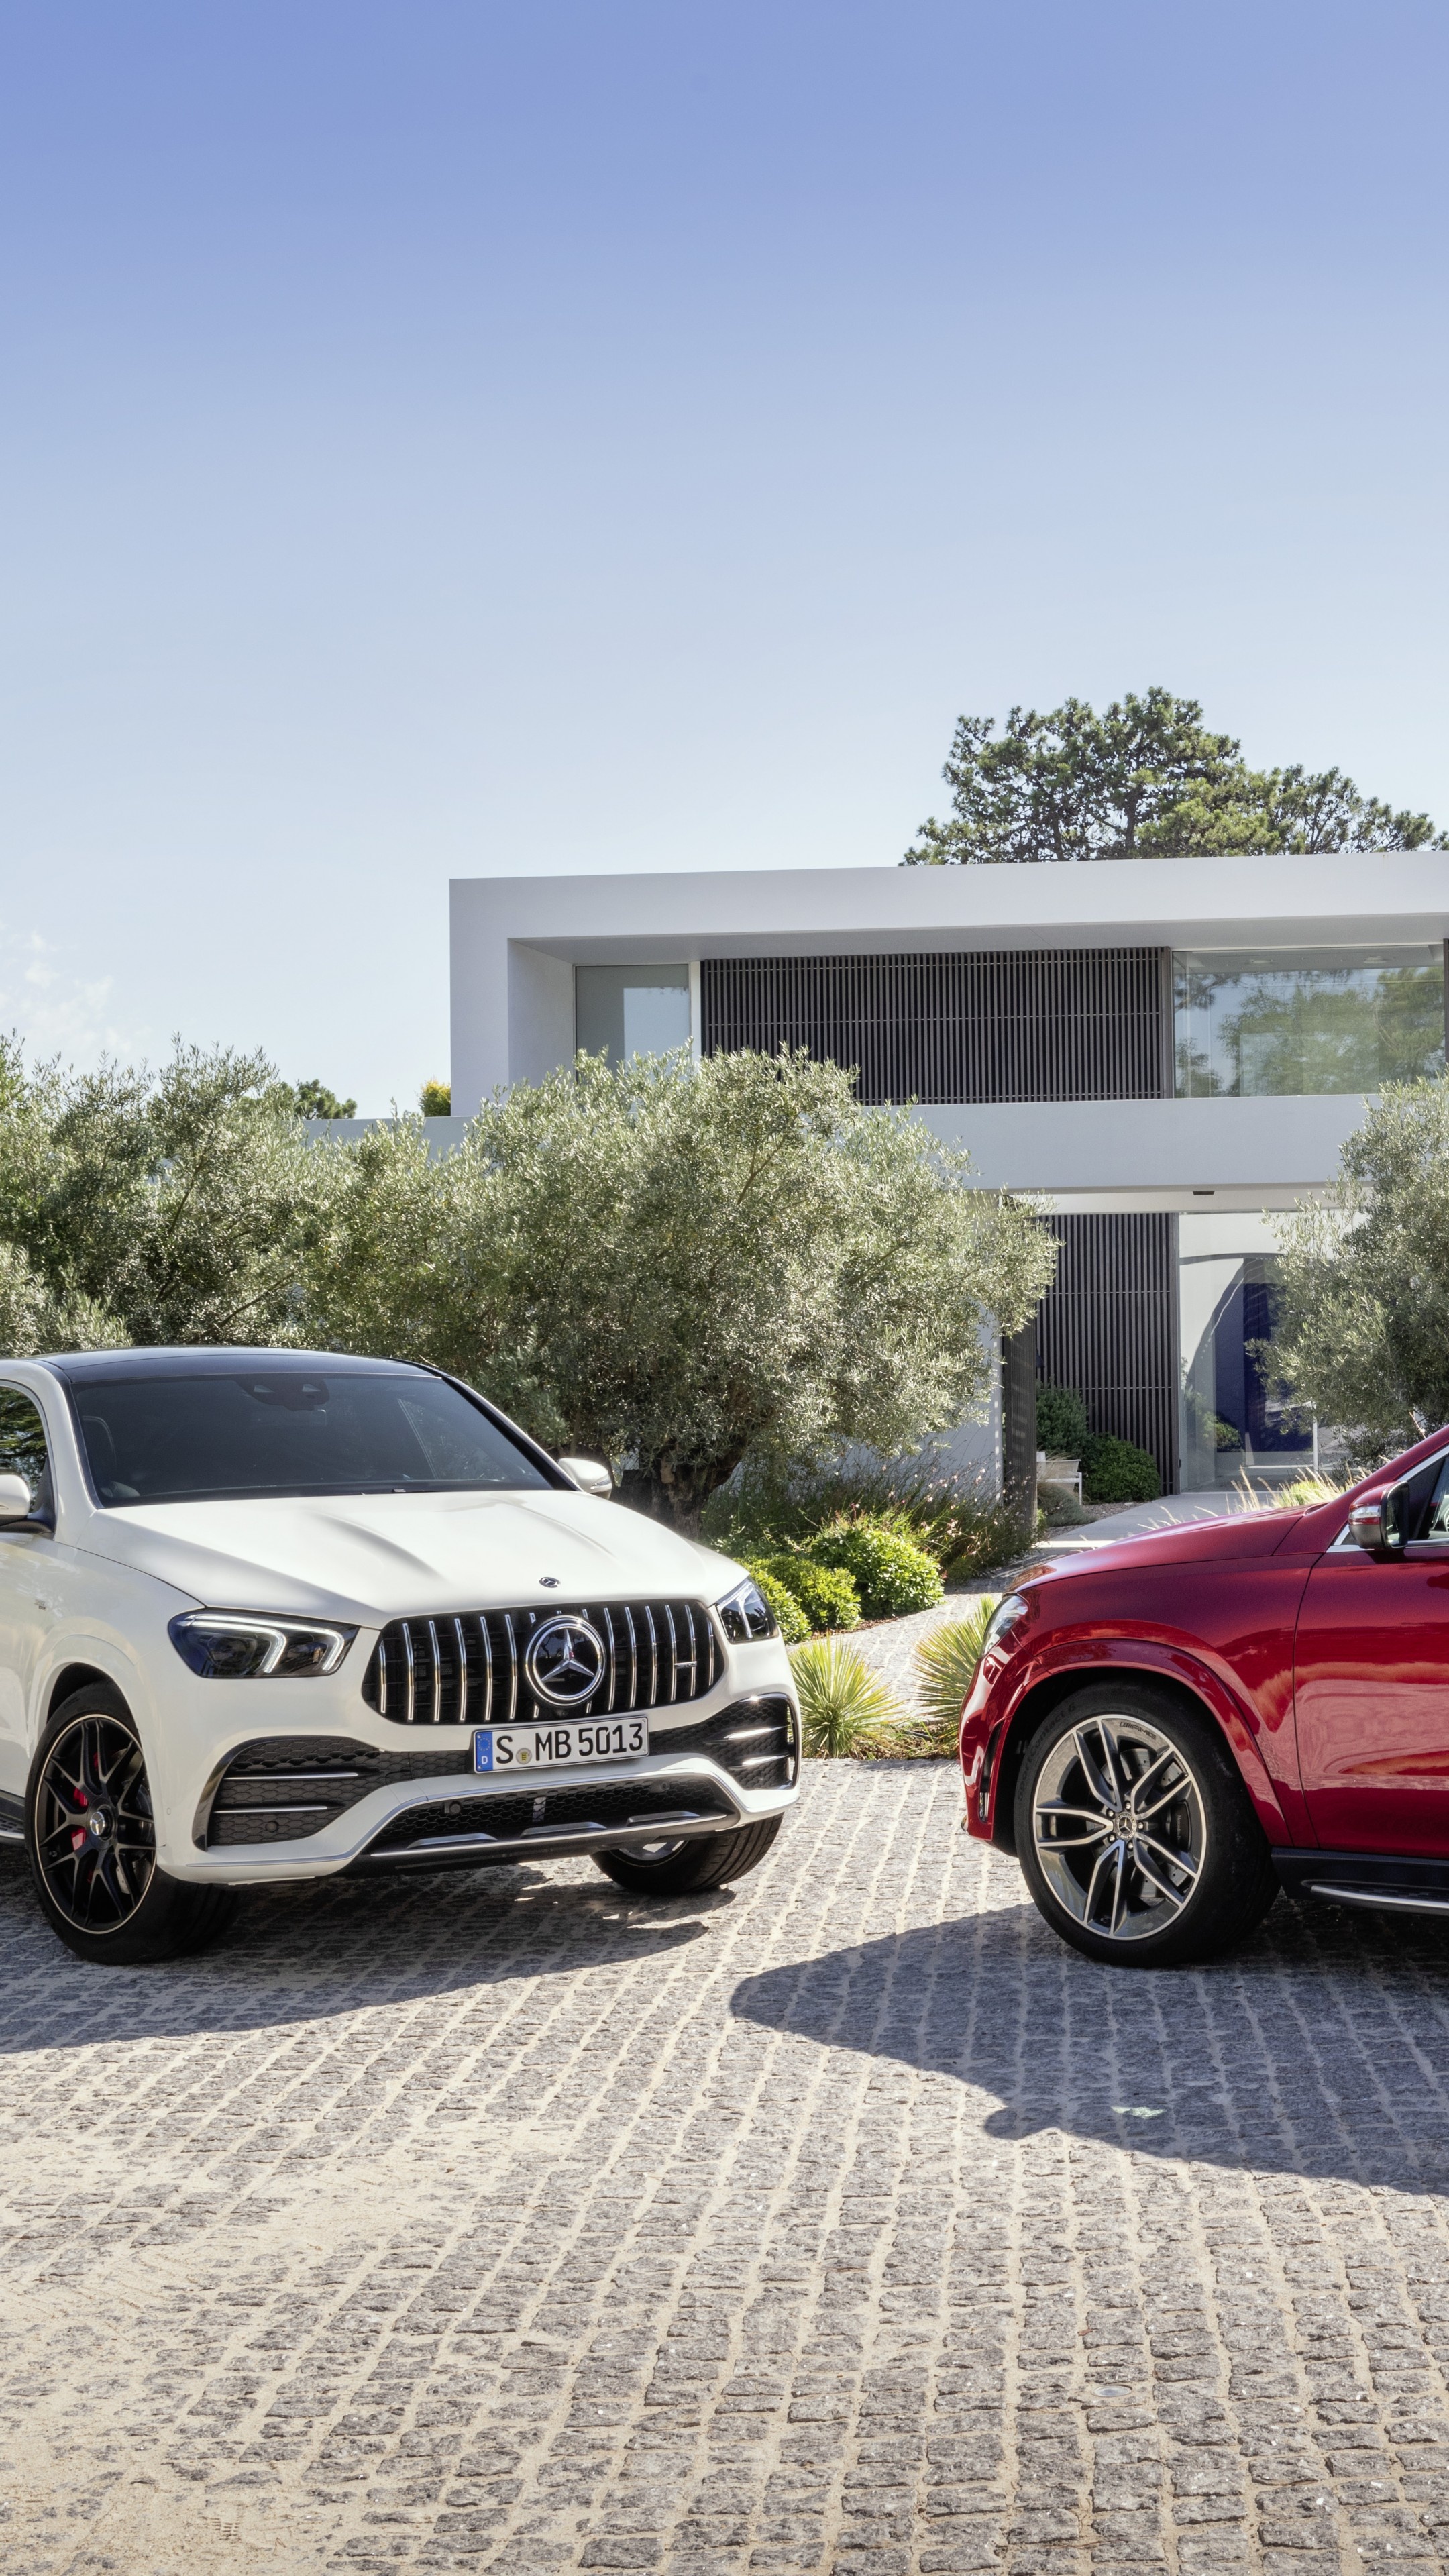 Mercedes-Benz GLE, AMG coupe, 2020 model, Cars and bikes, 2160x3840 4K Phone